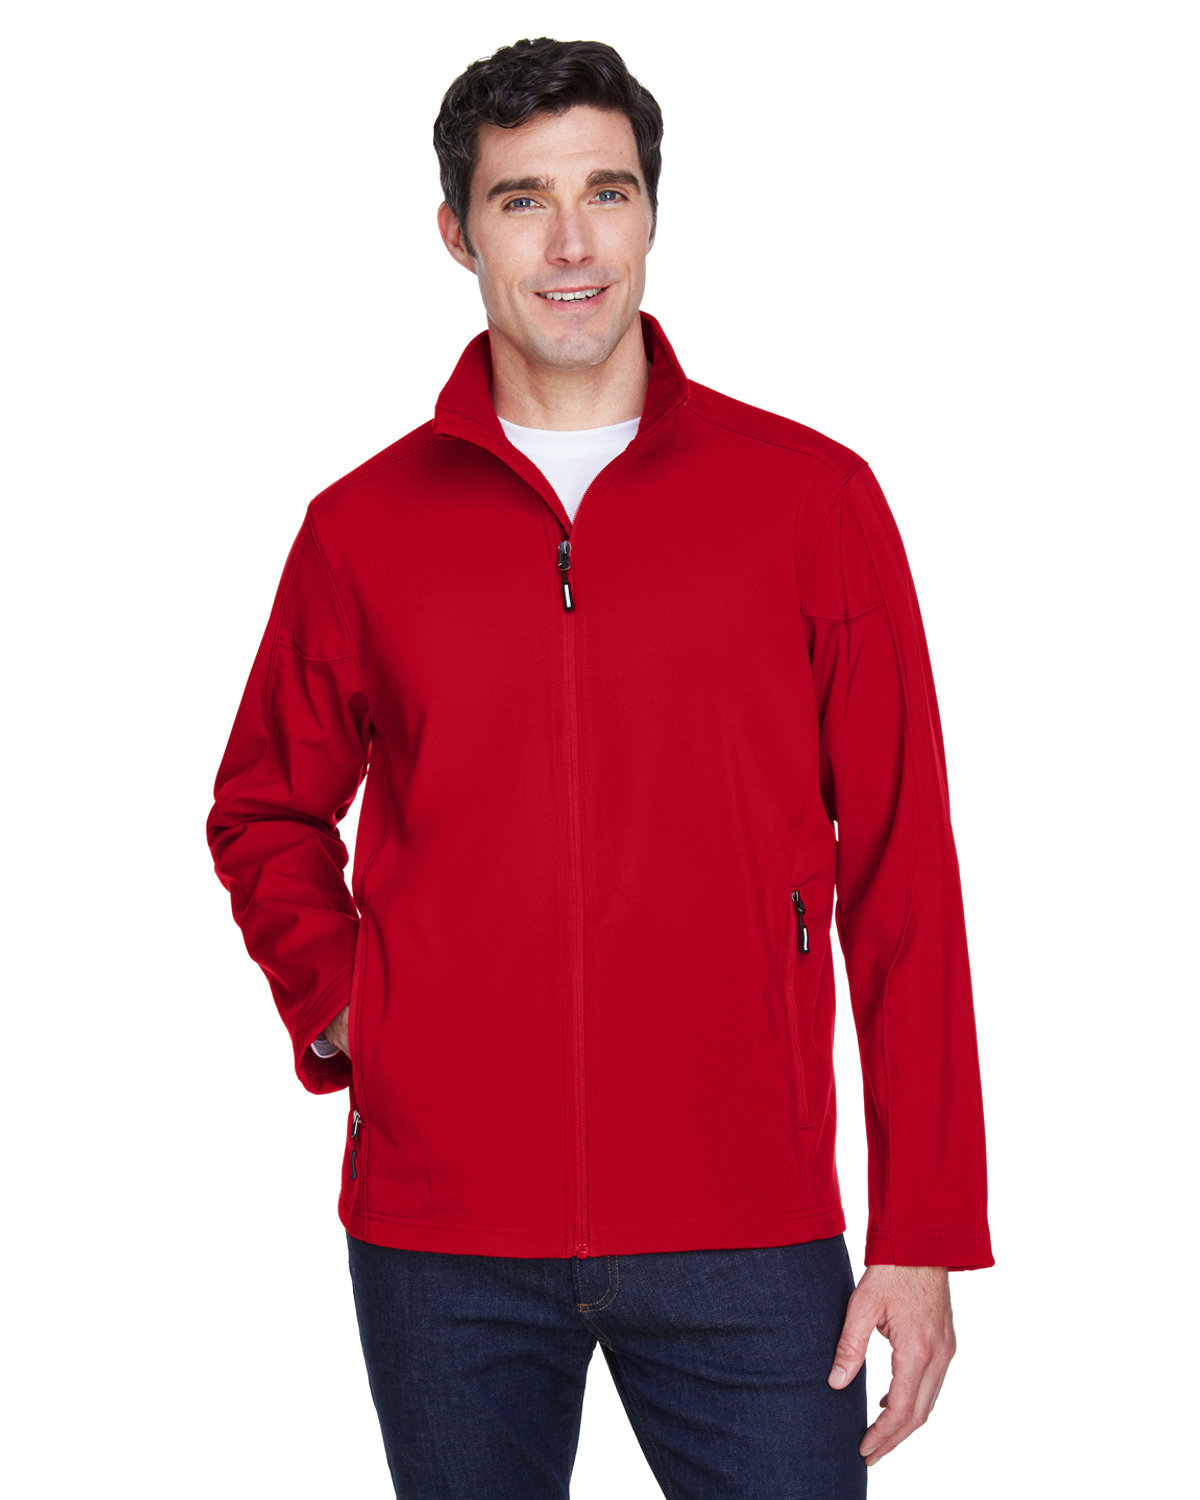 Core 365 Men\'s Cruise Two-Layer Fleece Bonded Soft Shell Jacket